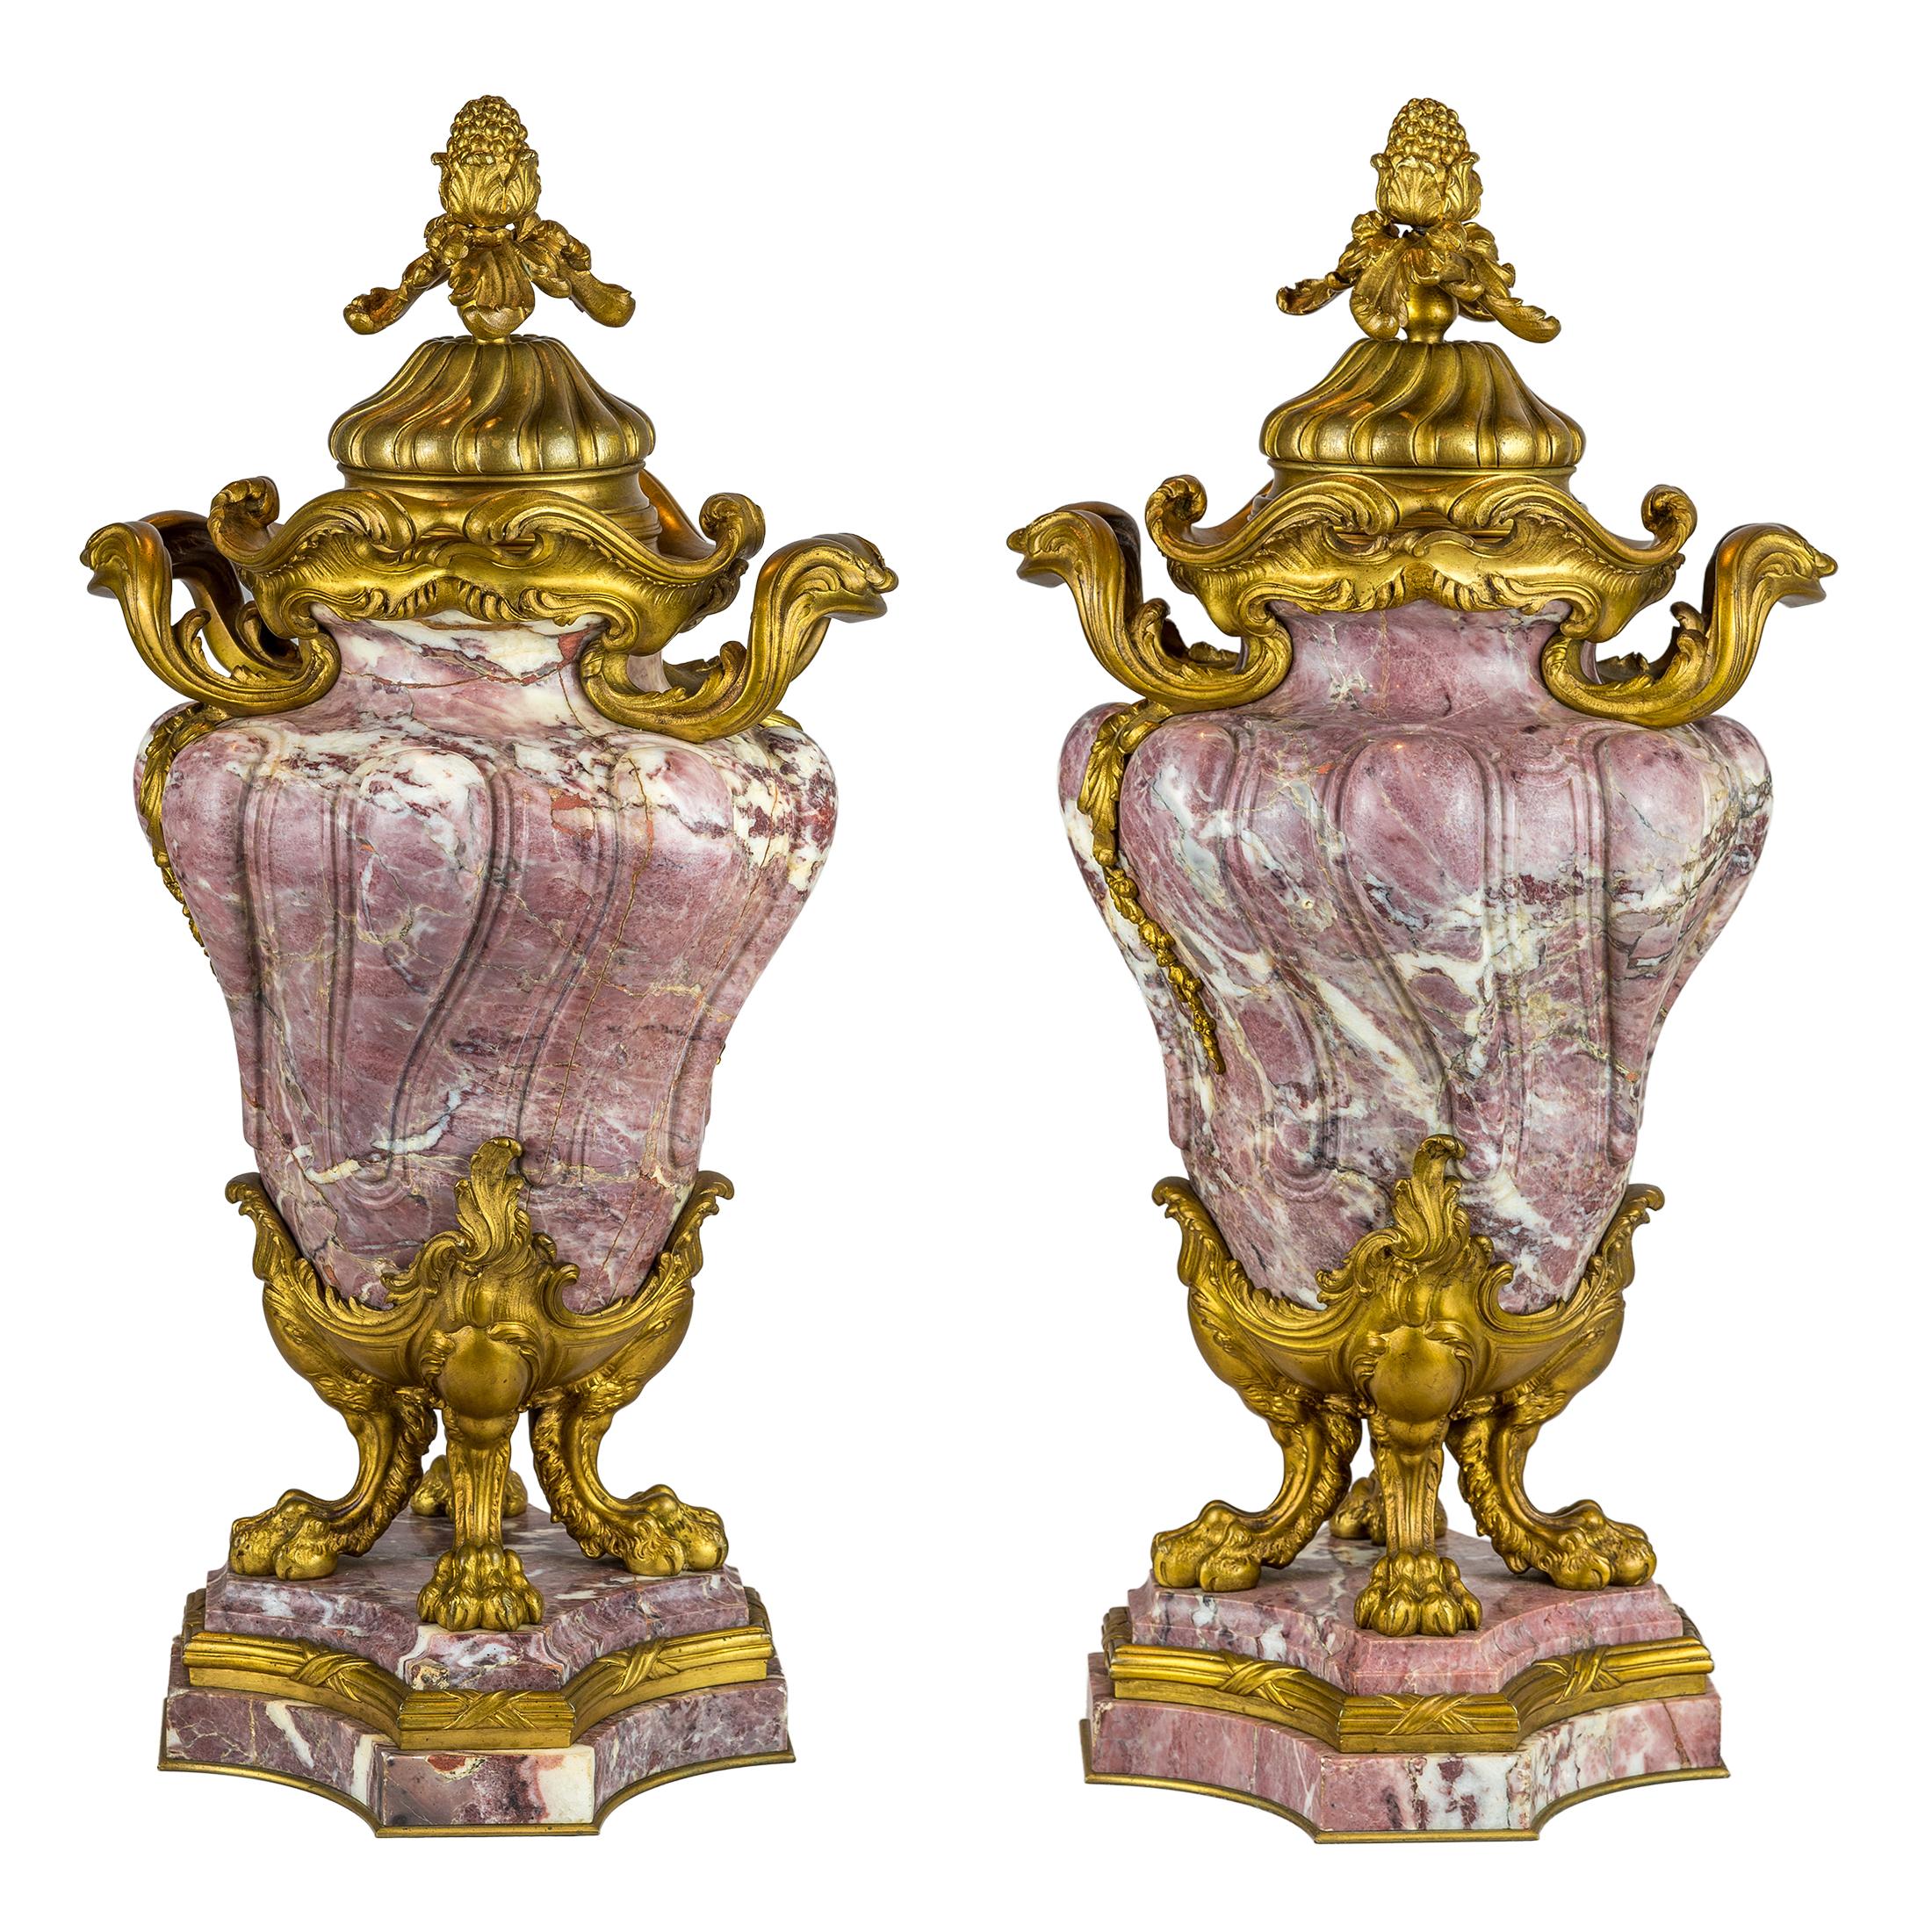 Louis XV-style Ormolu-Mounted and Fleur de Pêcher Marble Cassolets by Jollet & CIE Each with the stamp 'Jollet et Cie, Ave. Mon Colin A Paris' to the underside.

Maker: Jollet & CIE., Paris
Origin: French
Date: late 19th century
Size: 21 1/2 inches